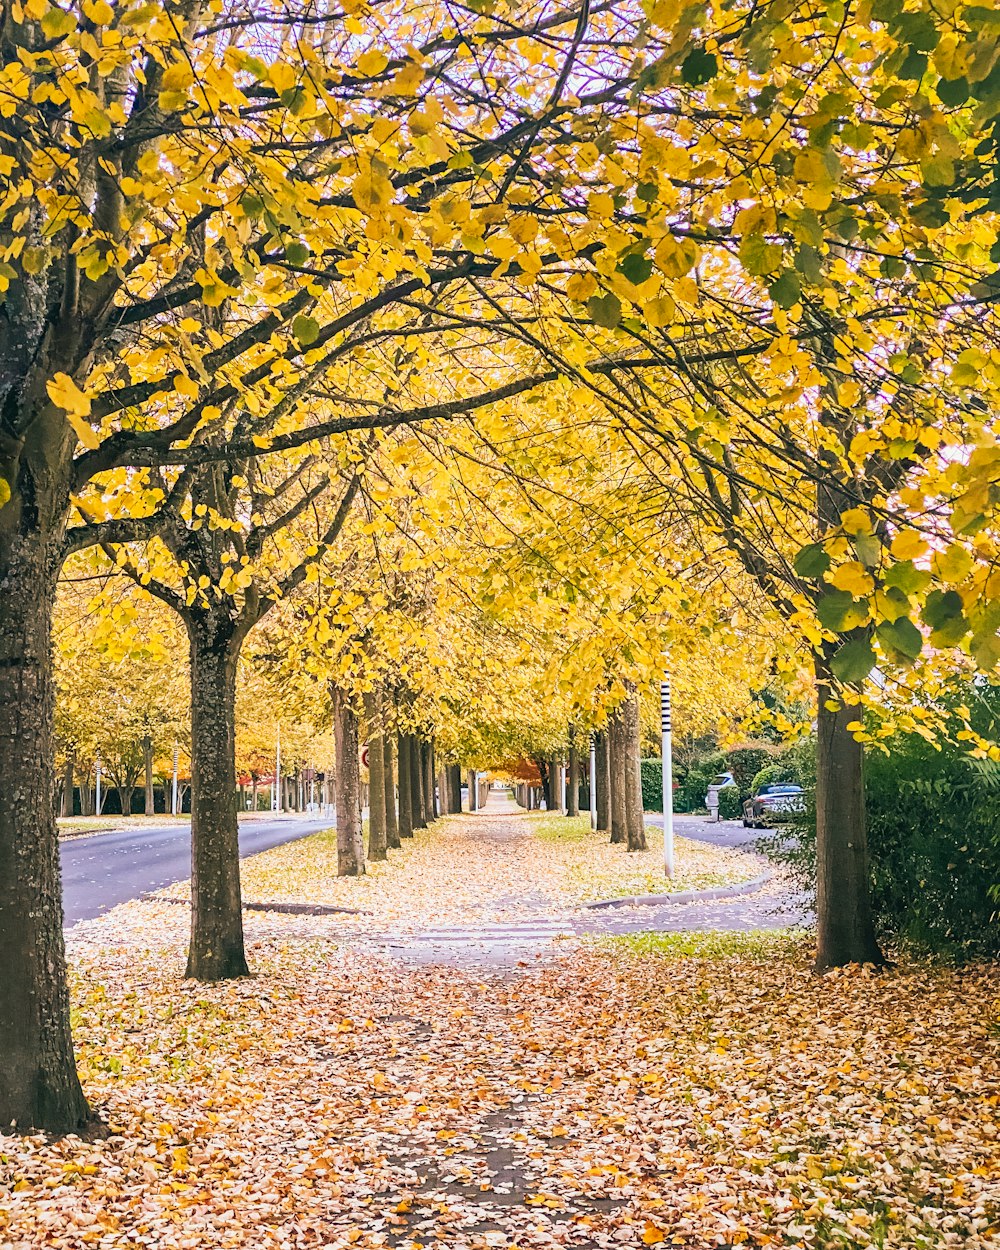 a tree lined street with yellow leaves on the ground